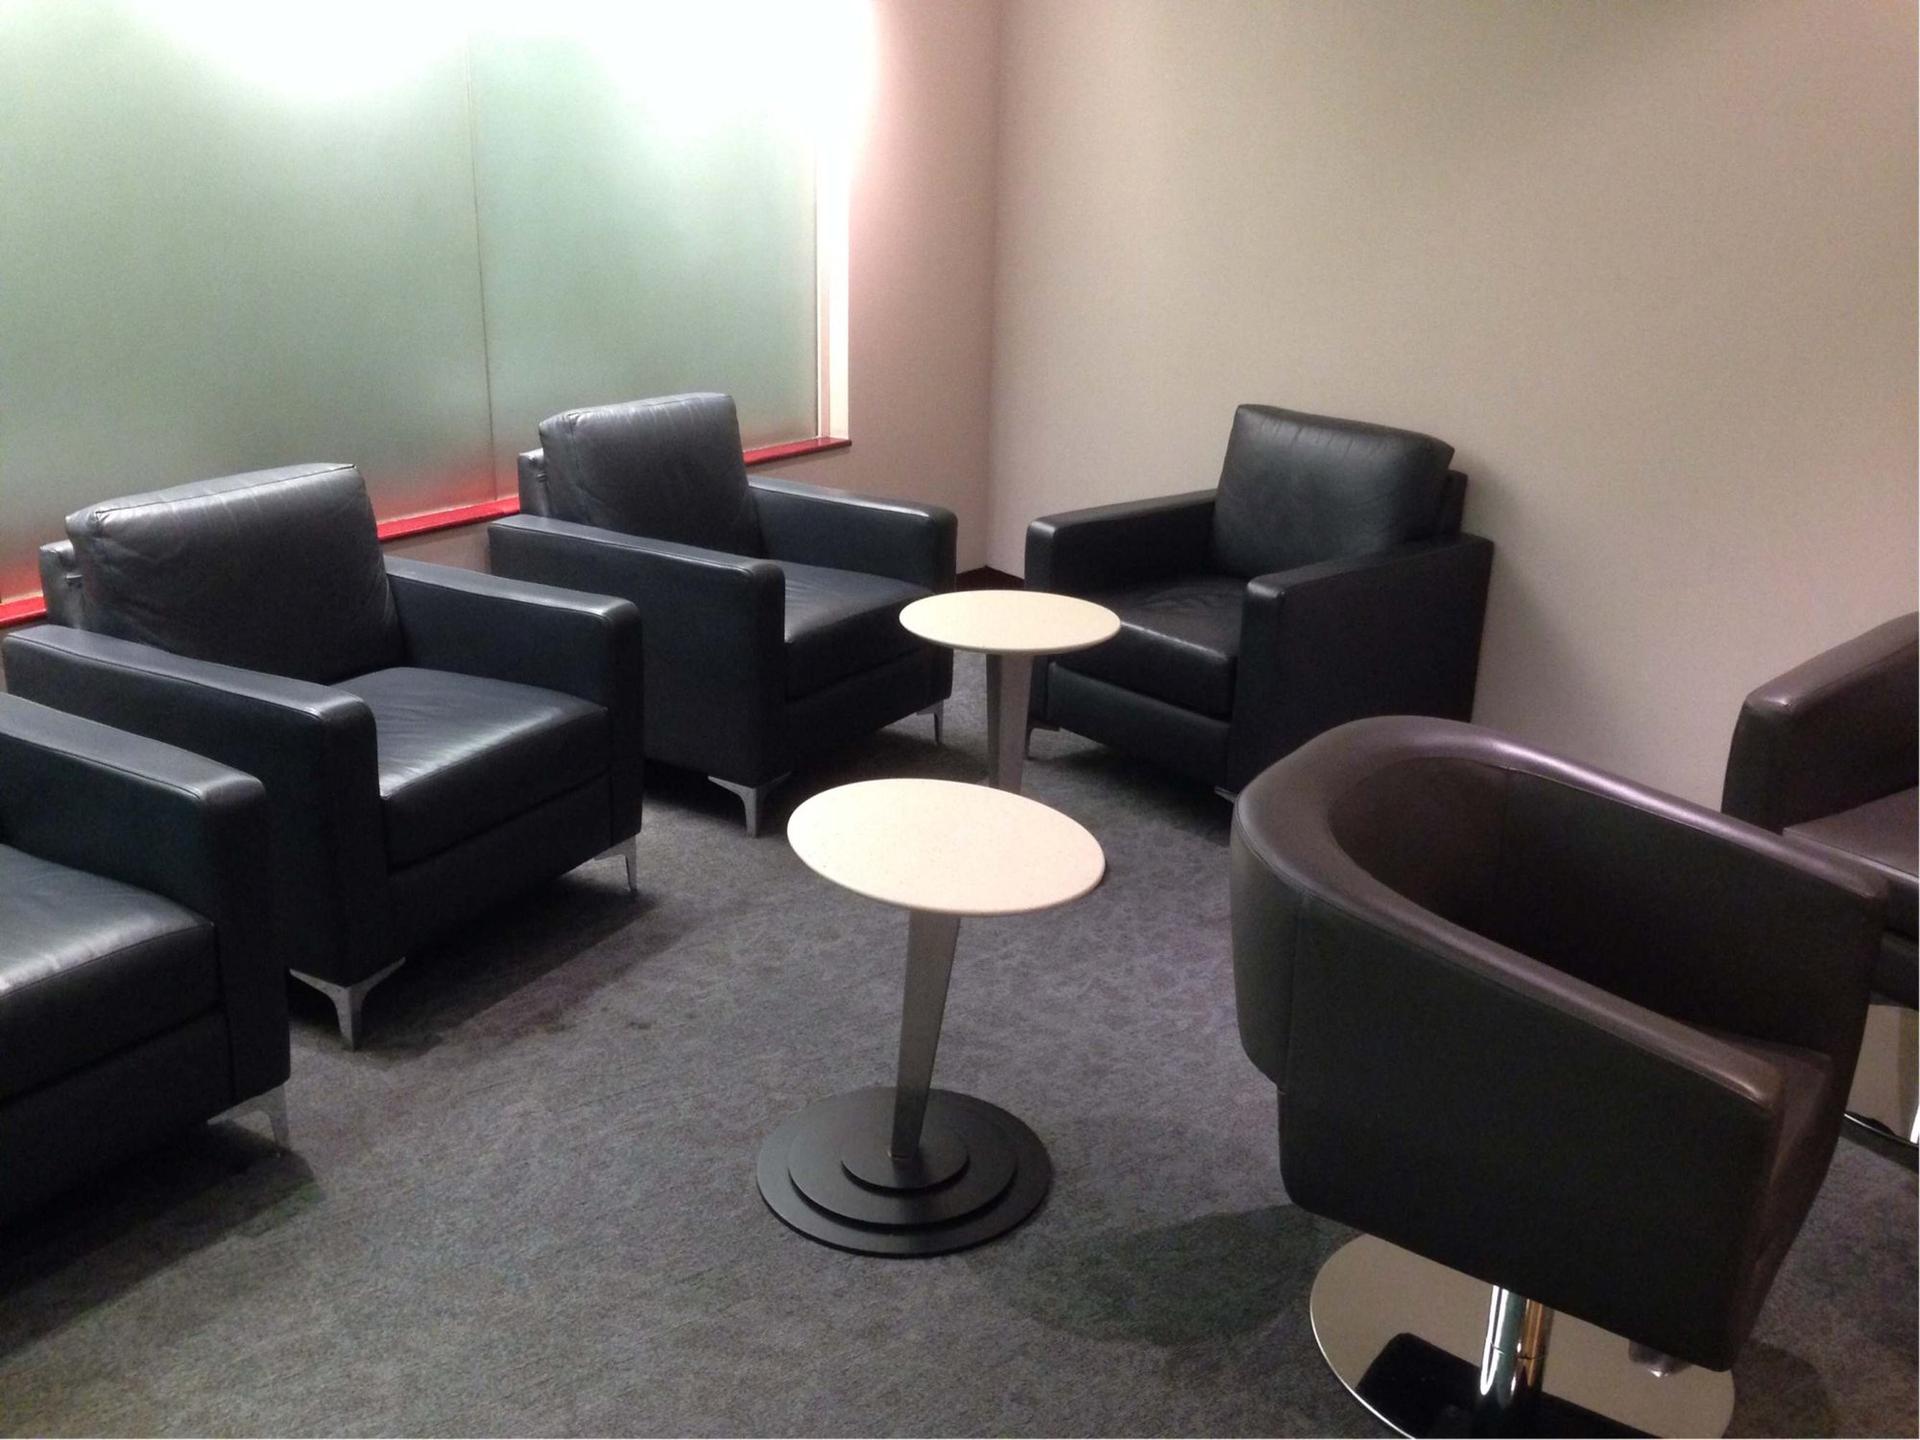 Air Canada Maple Leaf Lounge image 19 of 64